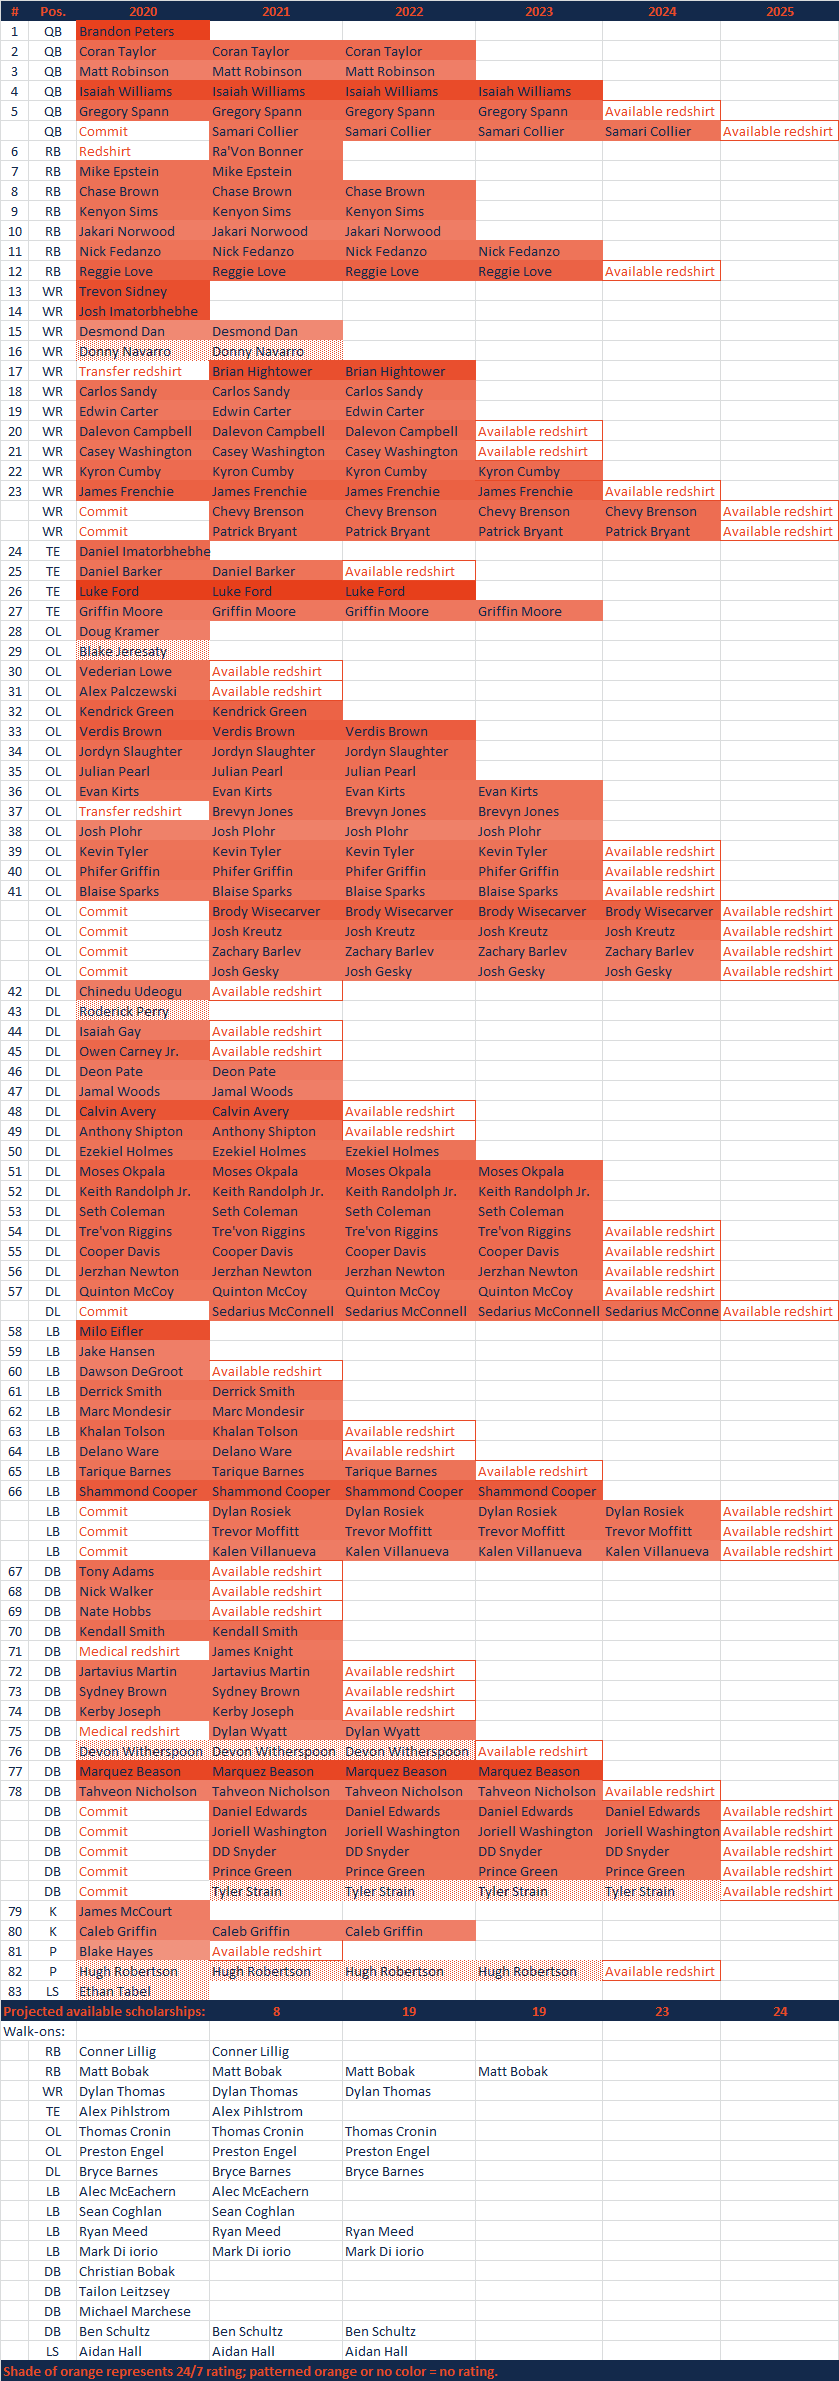 2020ScholarshipGrid0813.png